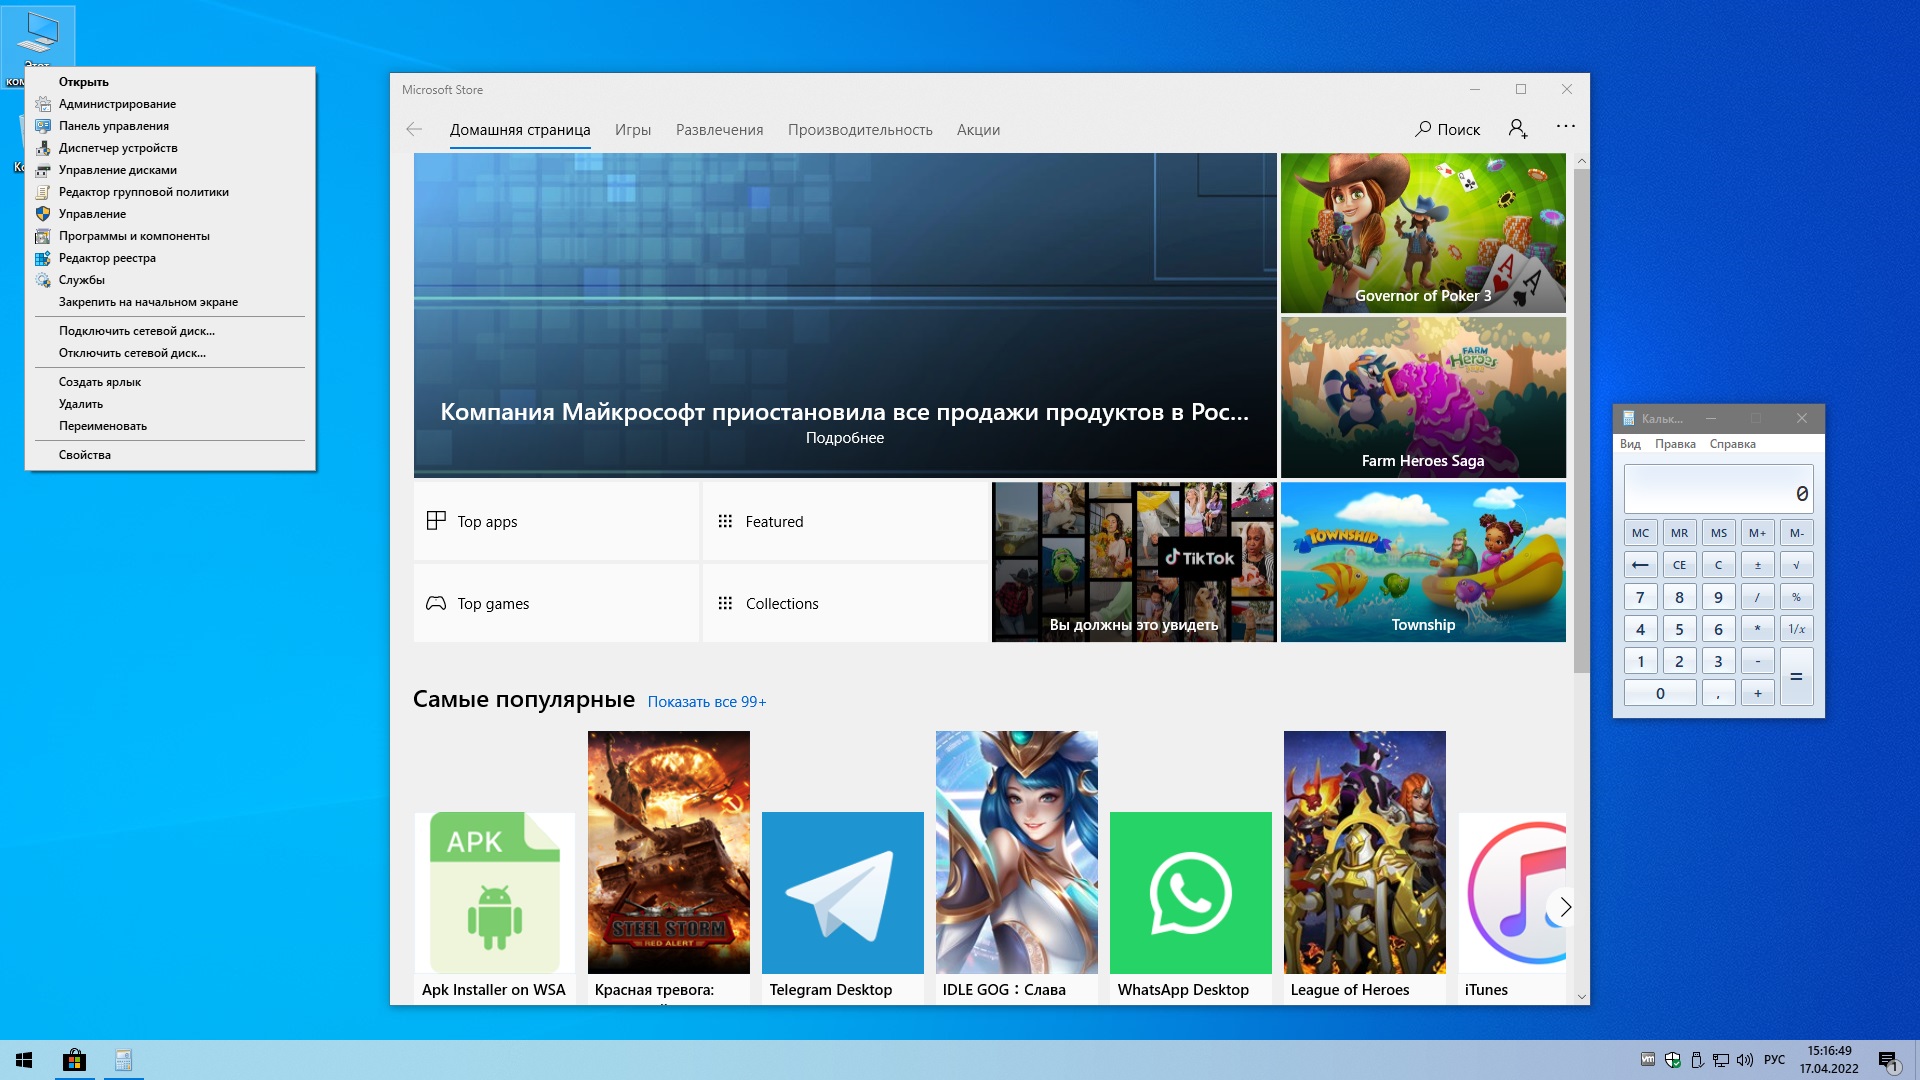 Windows 10 21H2 x64 Rus by OneSmiLe [19044.1679]